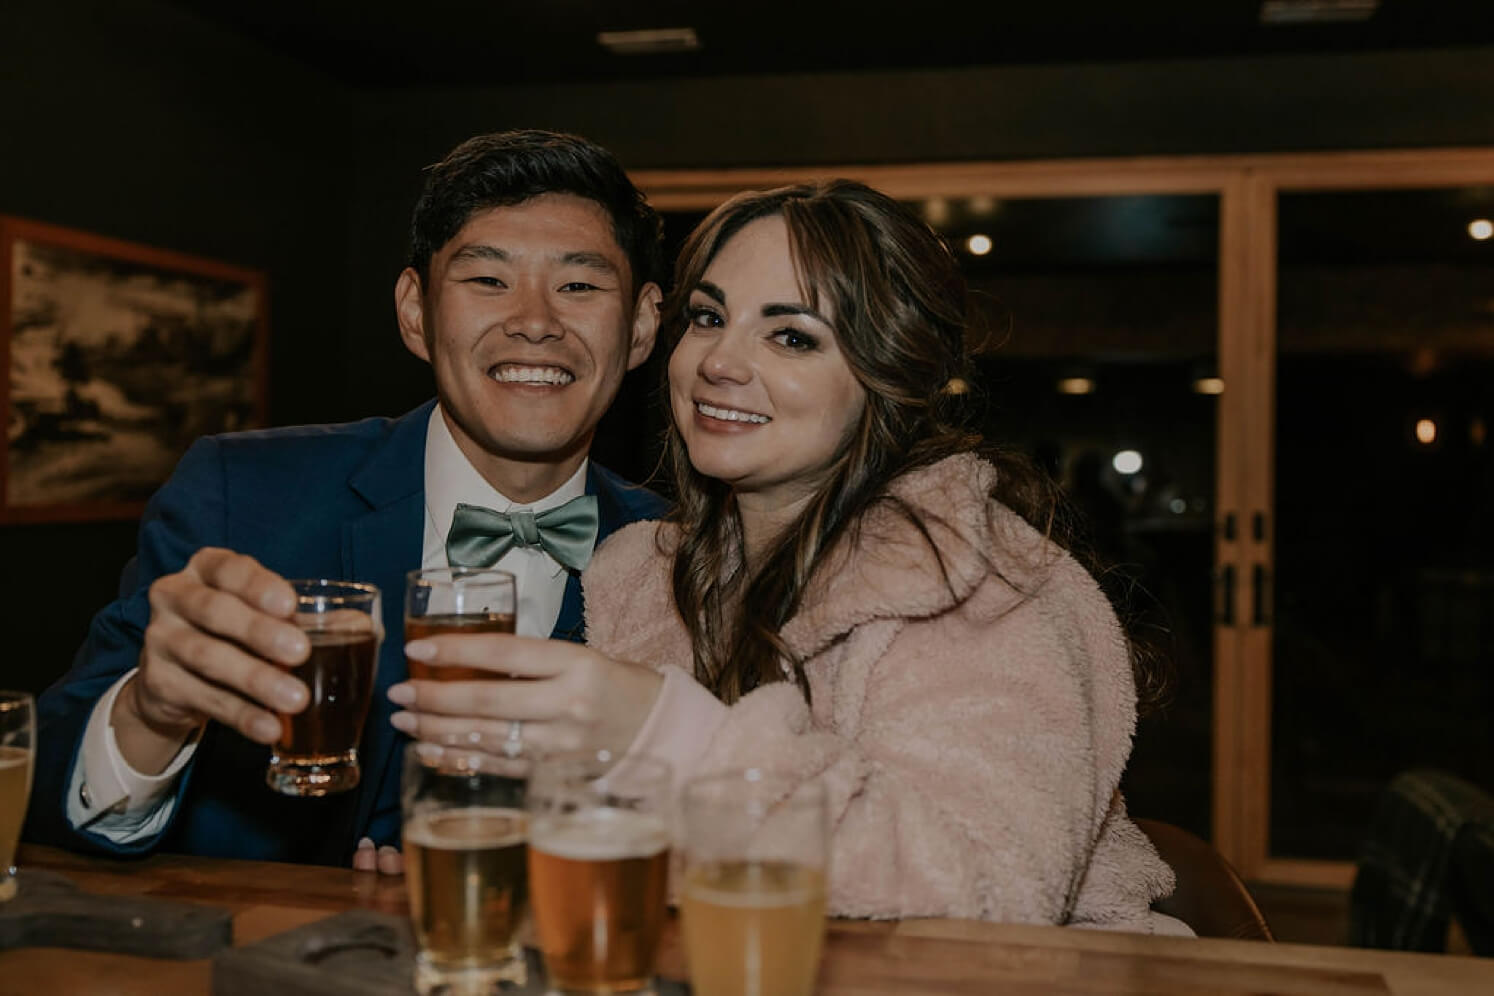 Bride and groom doing beer tasting after Colorado elopement | McArthur Weddings and Events